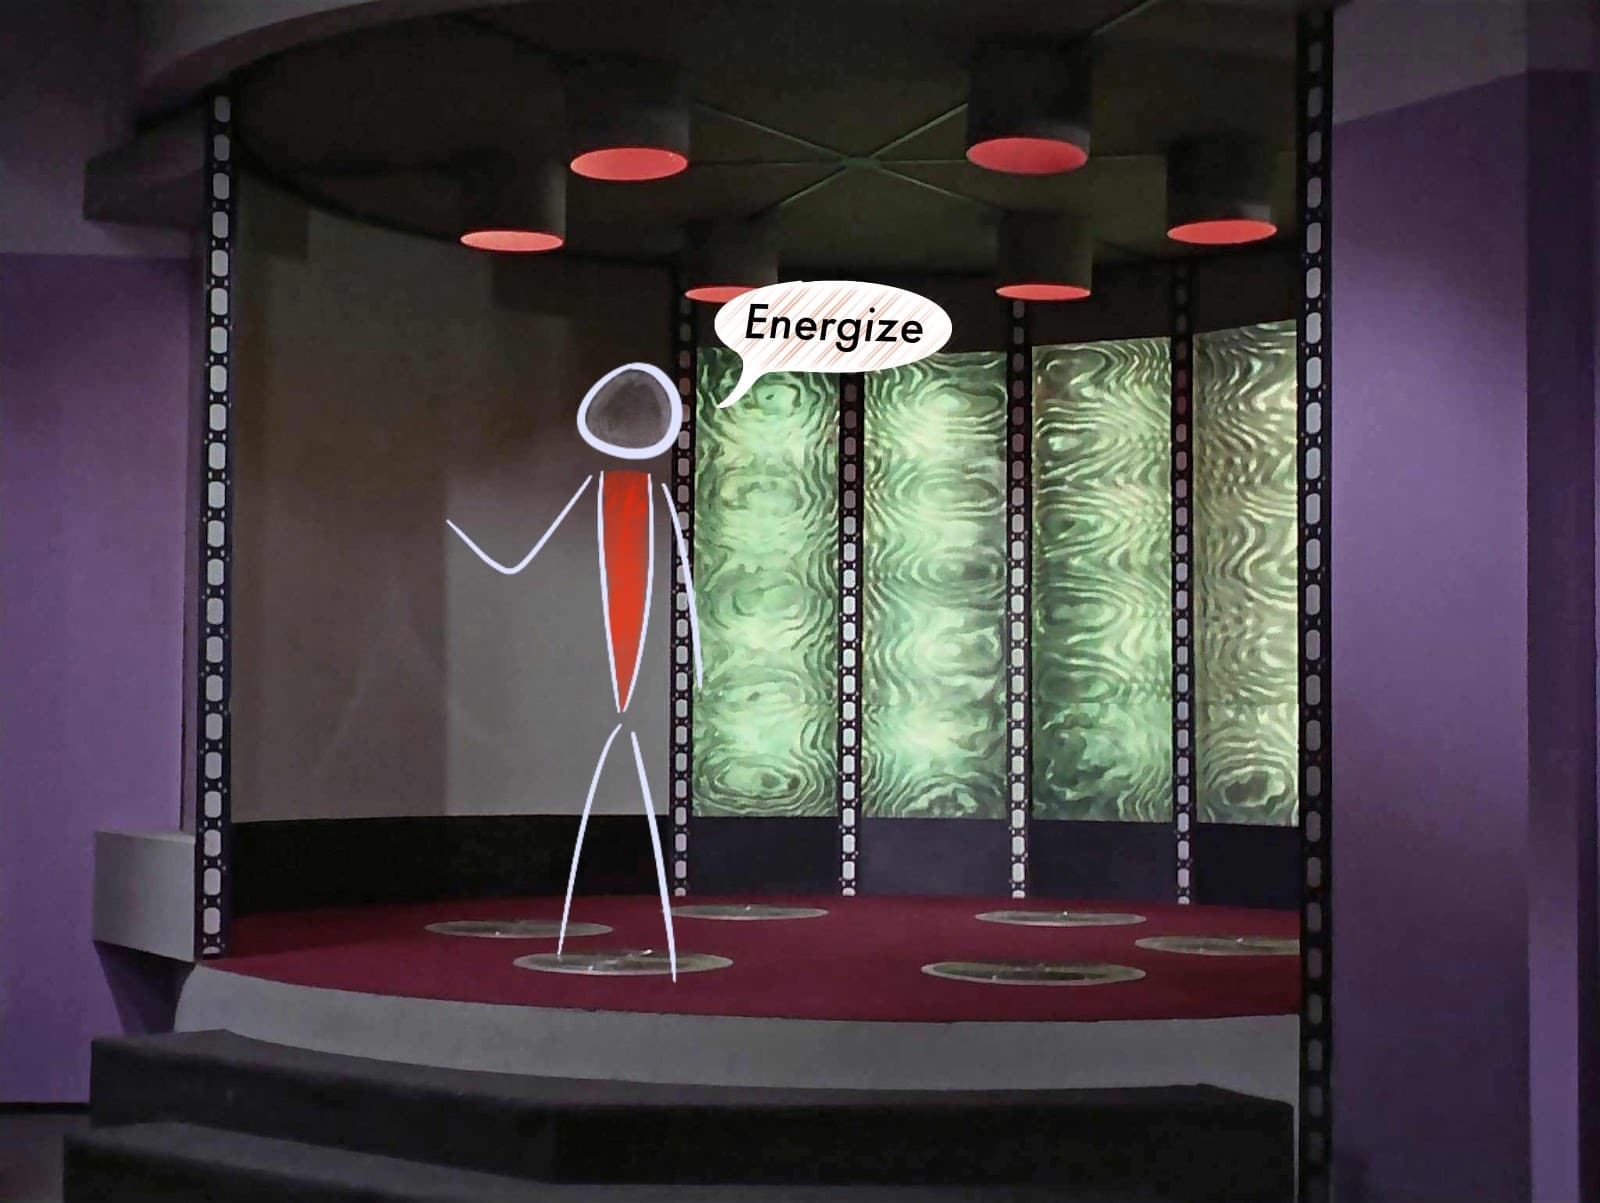 Star Trek Transporter room, with a red-shirt stick figure saying "Energize"